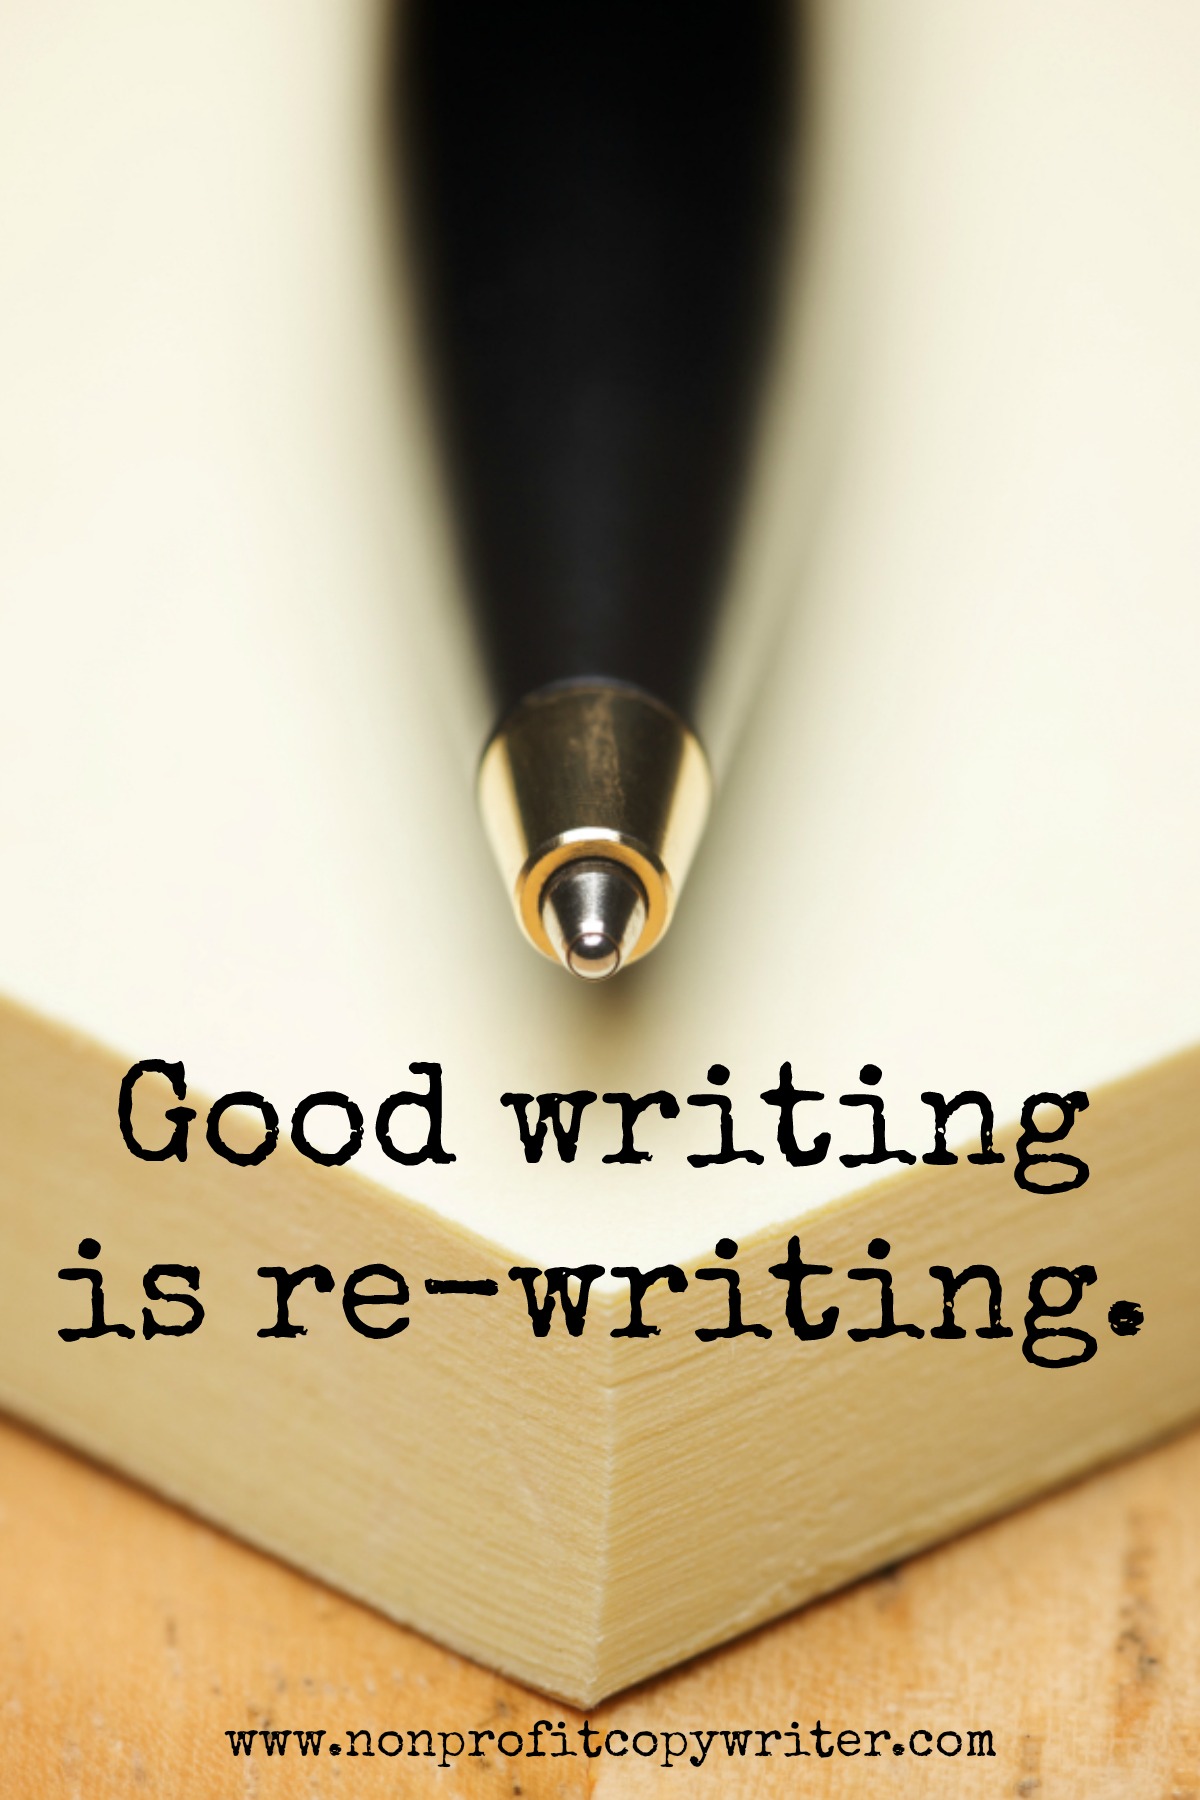 A wise word: good writing is re-writing